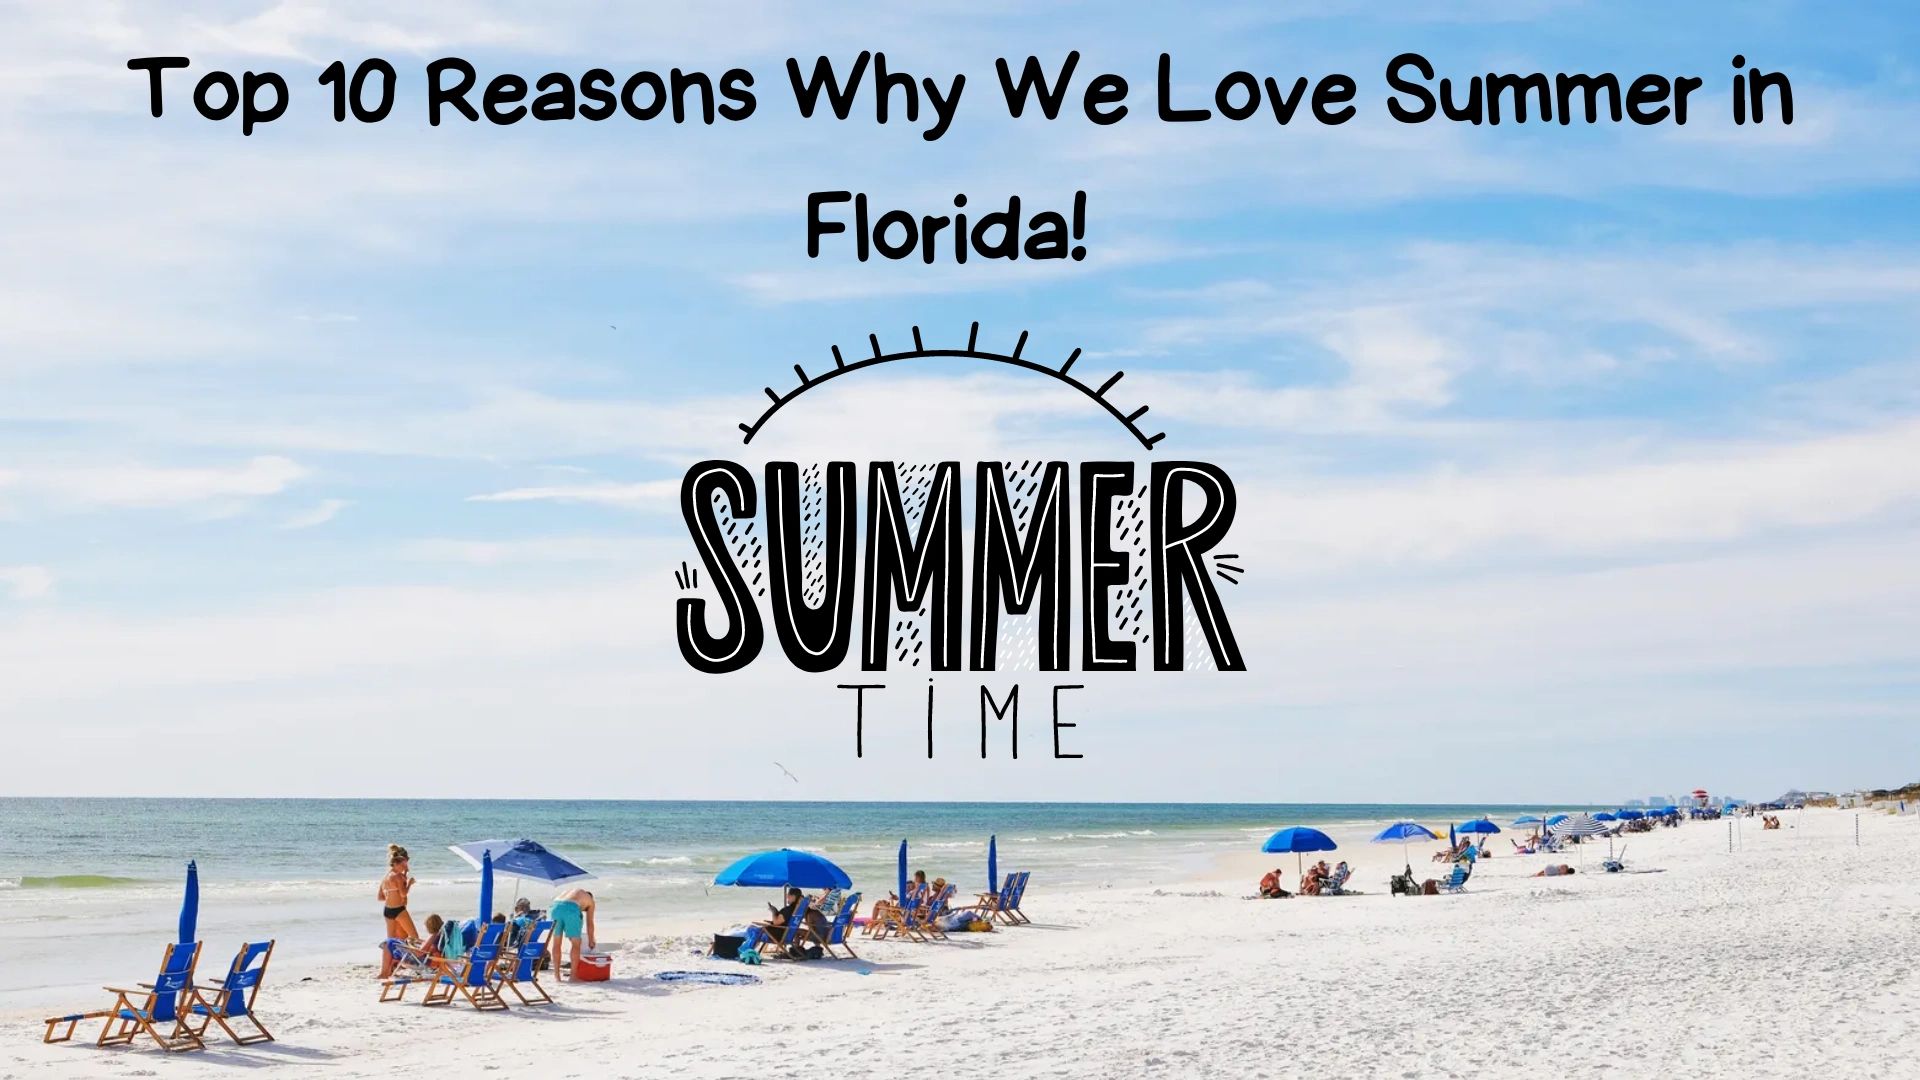 Top 10 Reasons Why We Love Summer in Florida!